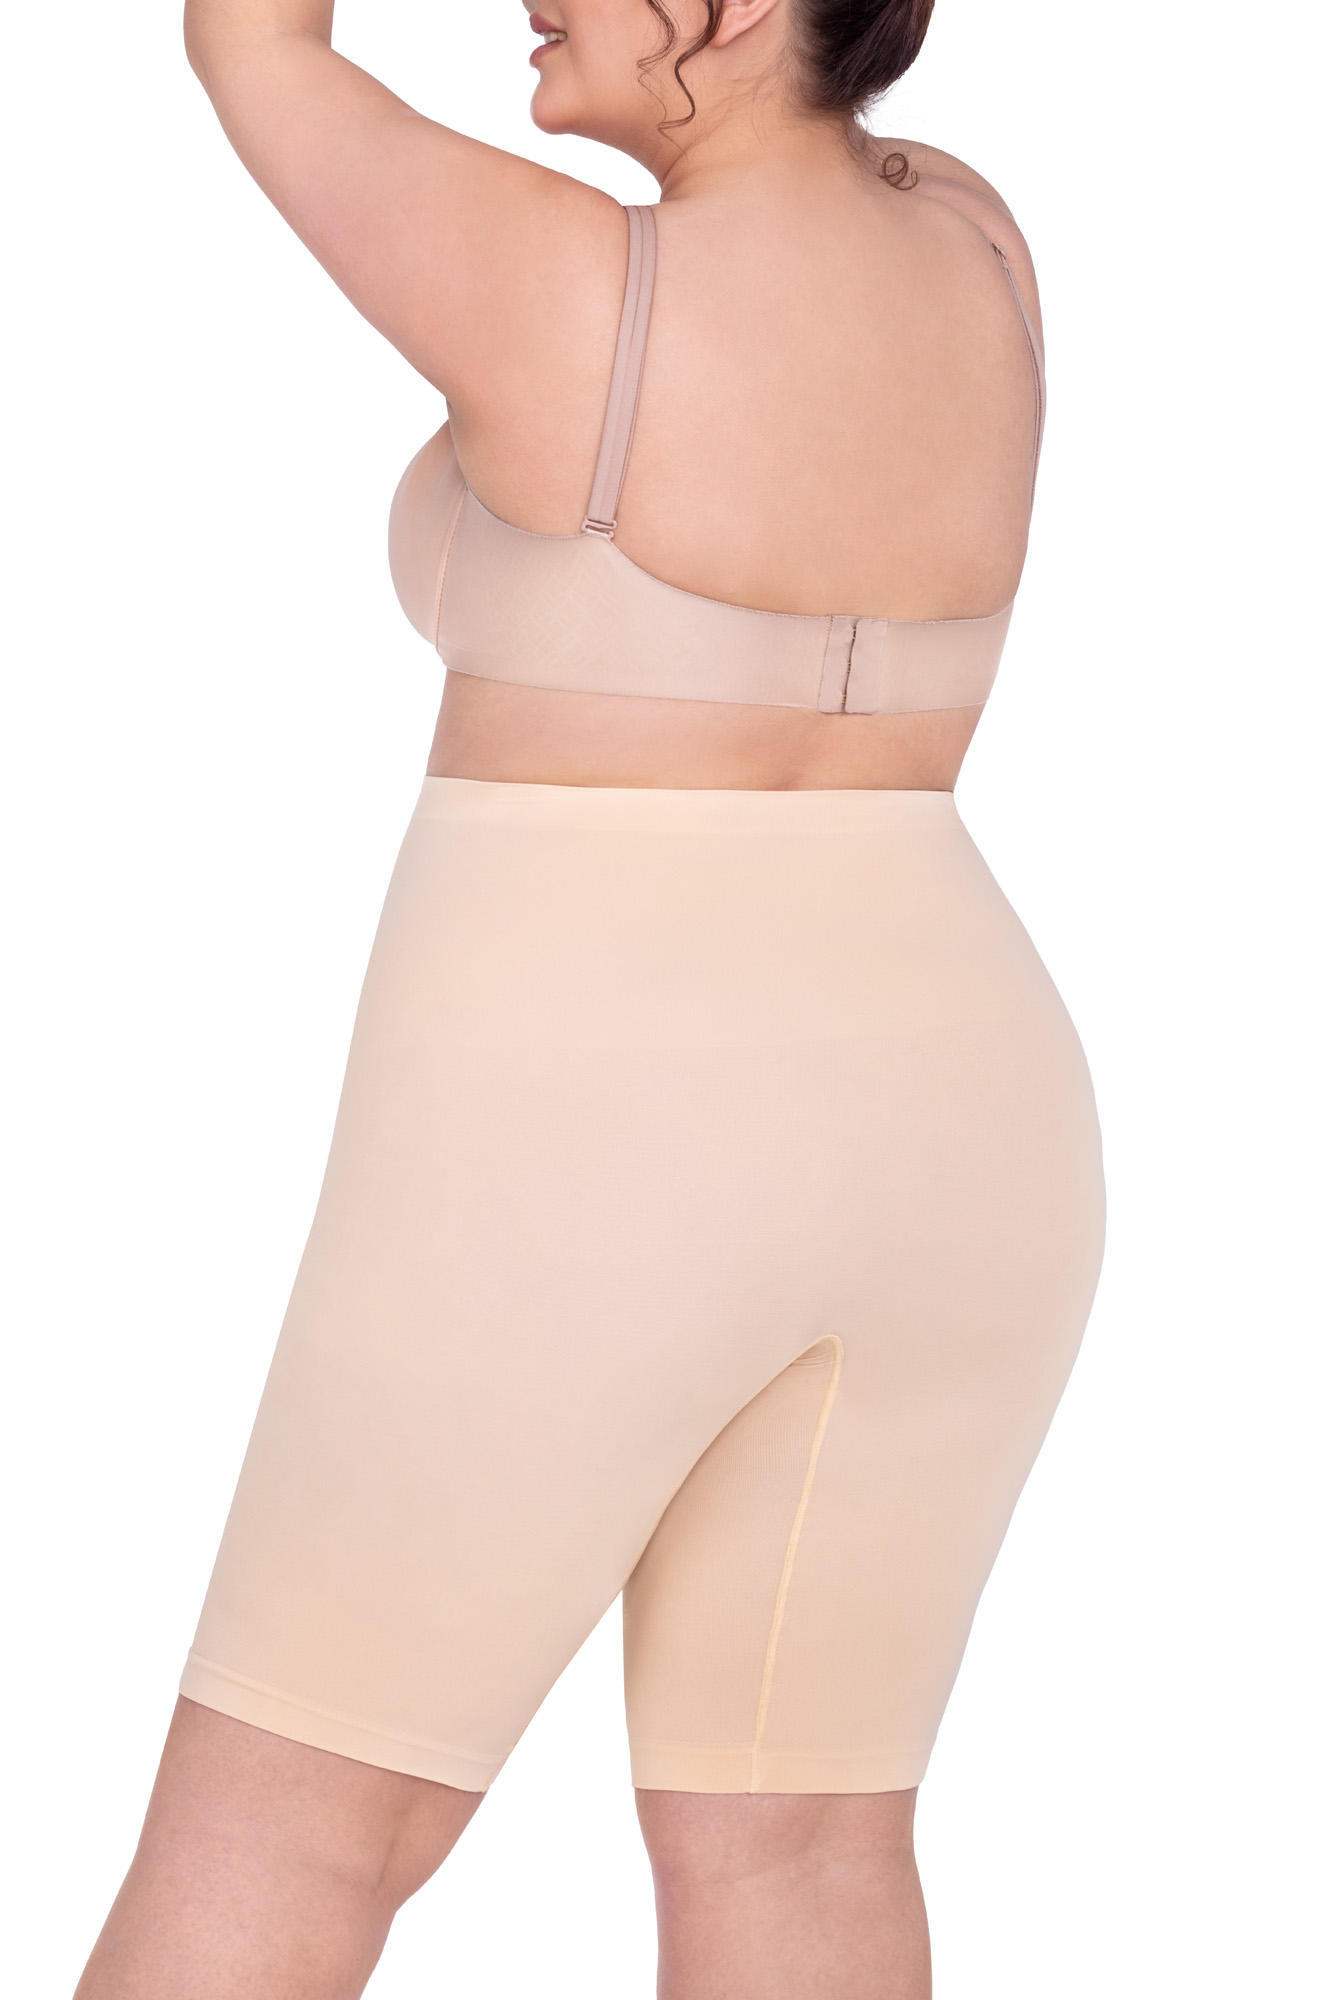 queen-size-breeze-anti-schuurshorts- champagne-pearl-rear